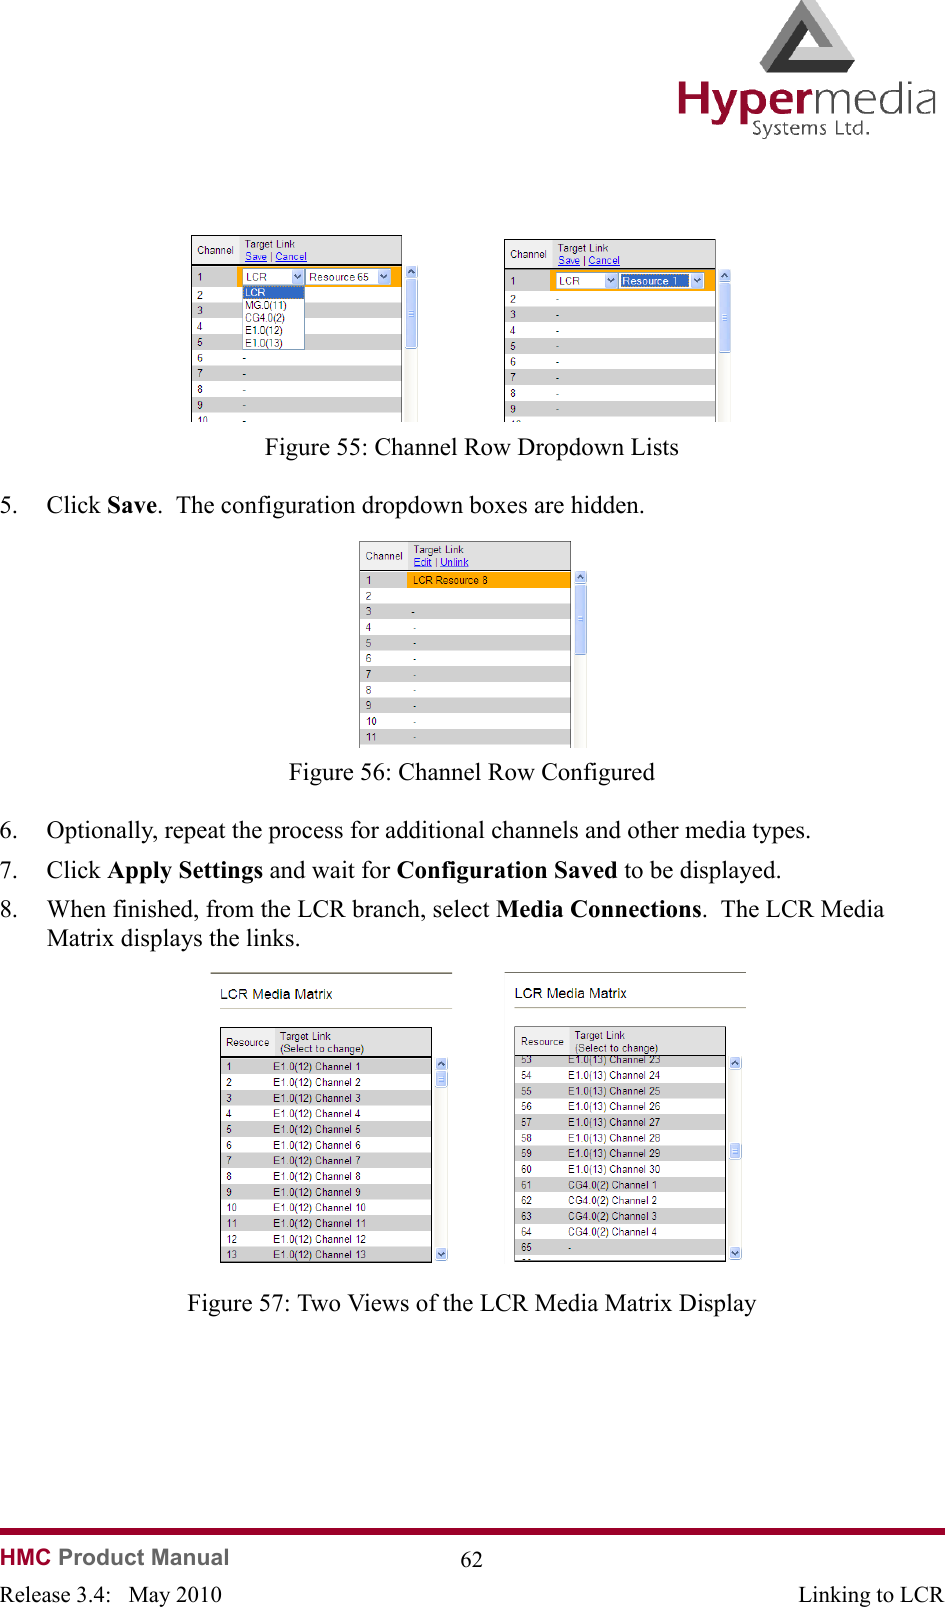   HMC Product Manual  62Release 3.4:   May 2010 Linking to LCR              Figure 55: Channel Row Dropdown Lists5. Click Save.  The configuration dropdown boxes are hidden.              Figure 56: Channel Row Configured6. Optionally, repeat the process for additional channels and other media types.7. Click Apply Settings and wait for Configuration Saved to be displayed.8. When finished, from the LCR branch, select Media Connections.  The LCR Media Matrix displays the links.              Figure 57: Two Views of the LCR Media Matrix Display